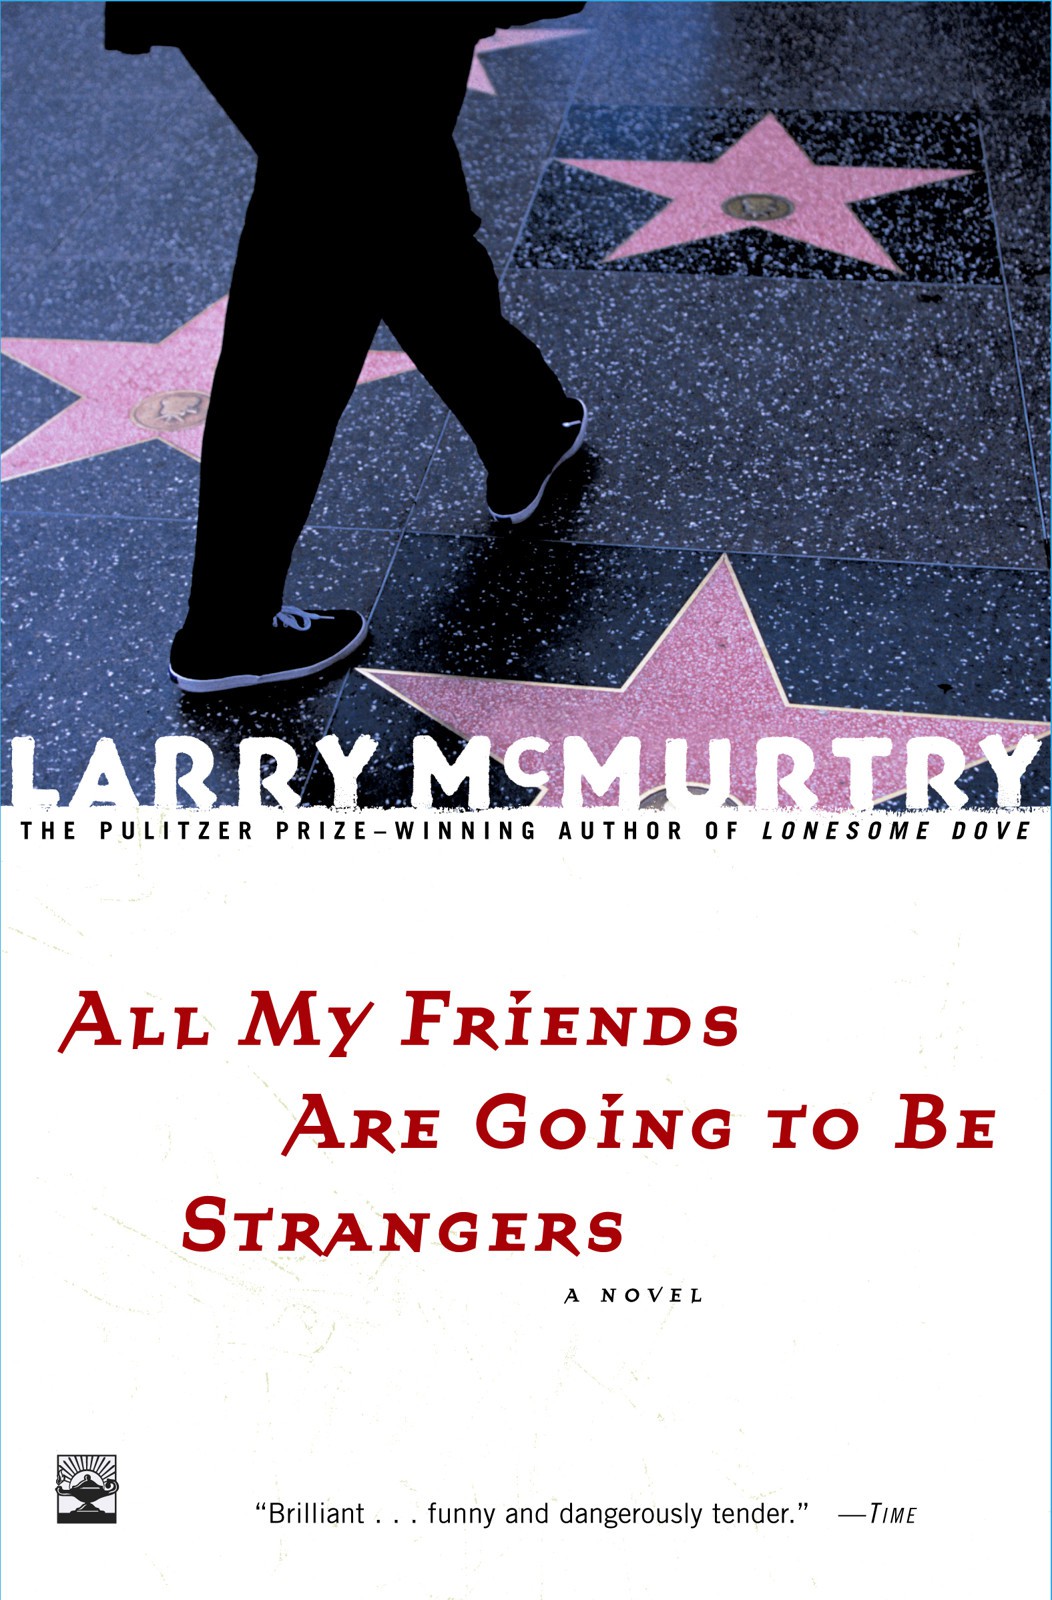 All My Friends Are Going to Be Strangers: A Novel by Larry McMurtry